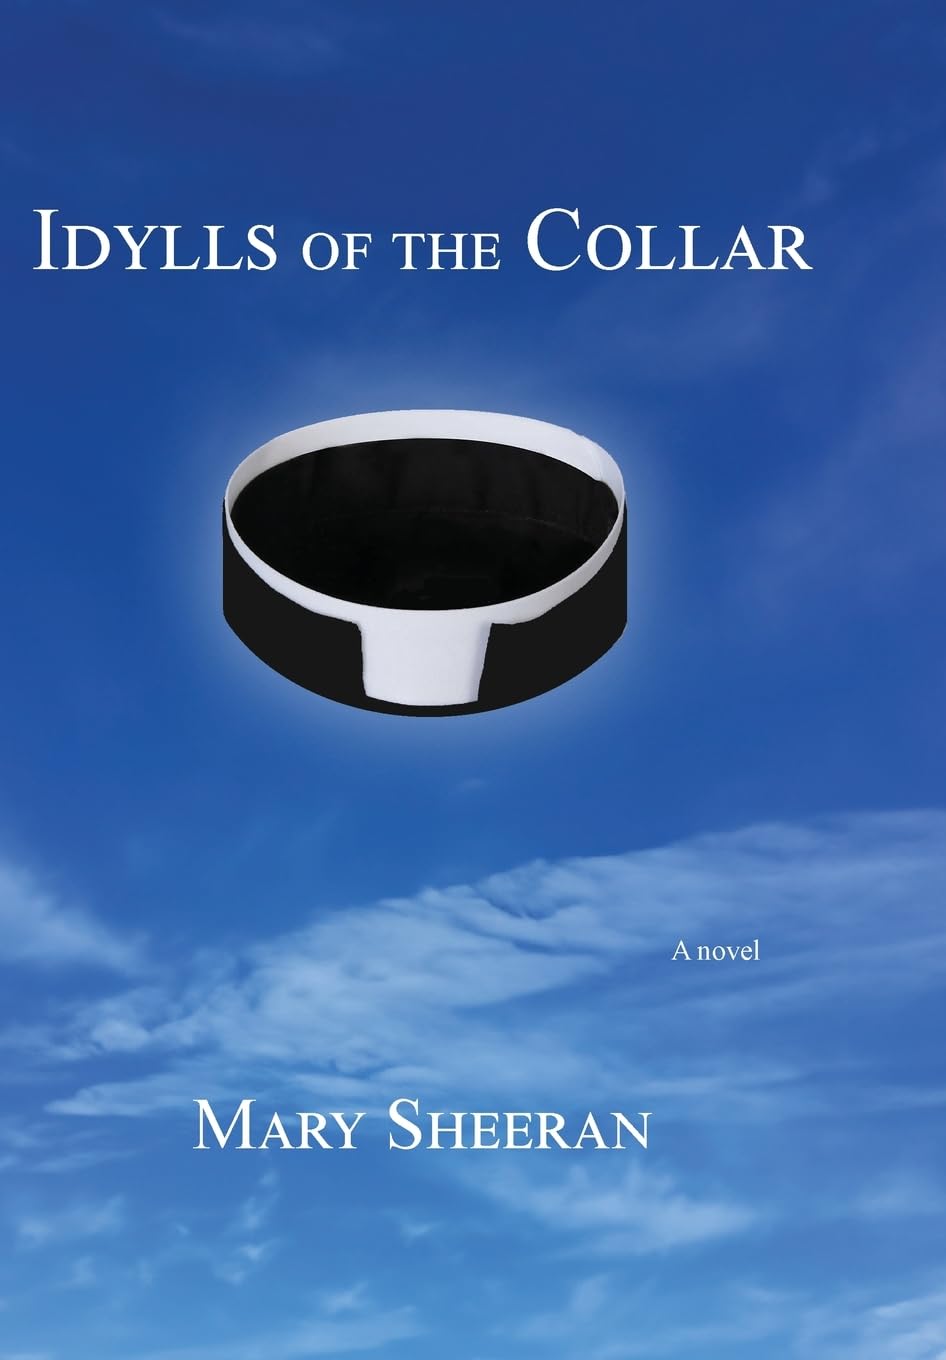 Explore Themes of Friendship, Faith, and Feminist Spirituality: Idylls of the Collar by Mary Sheeran